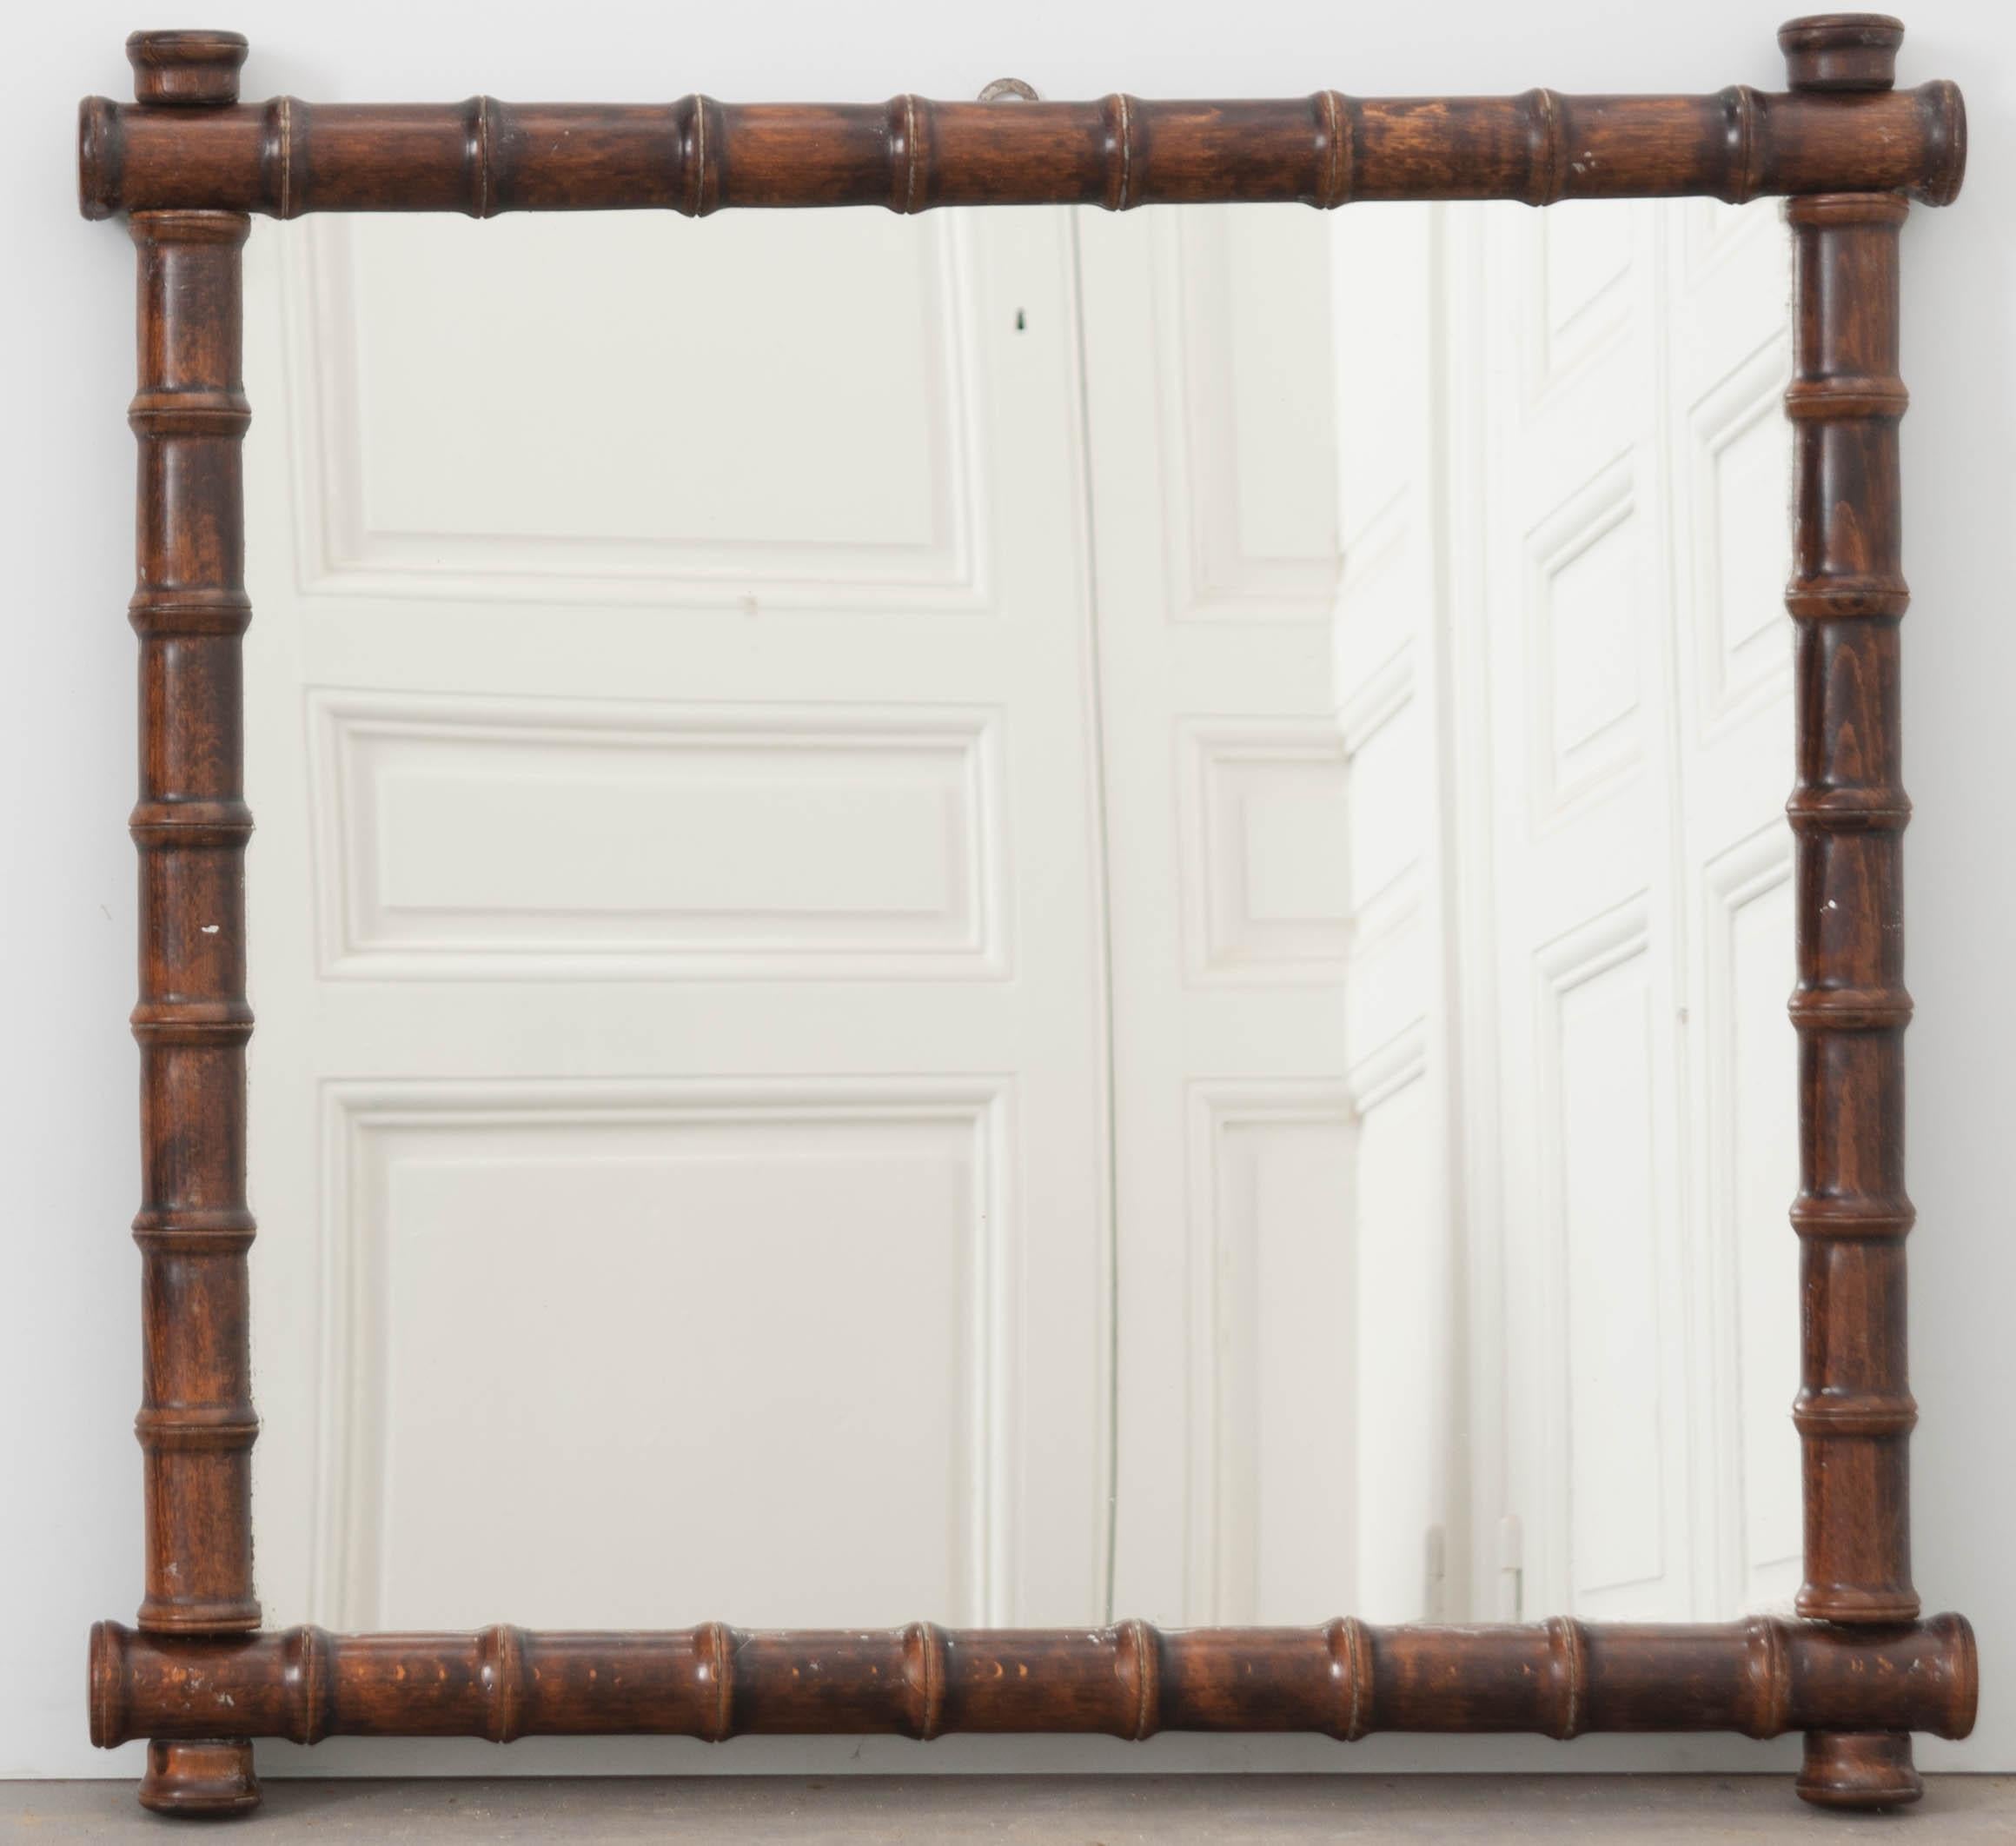 This terrific faux bamboo mirror was made in France, circa 1880. Its frame was made by turning hand-selected oak into a stacked-spool or faux bamboo design. The darker frame is nearly a square, which is a somewhat unusual shape for these mirrors.